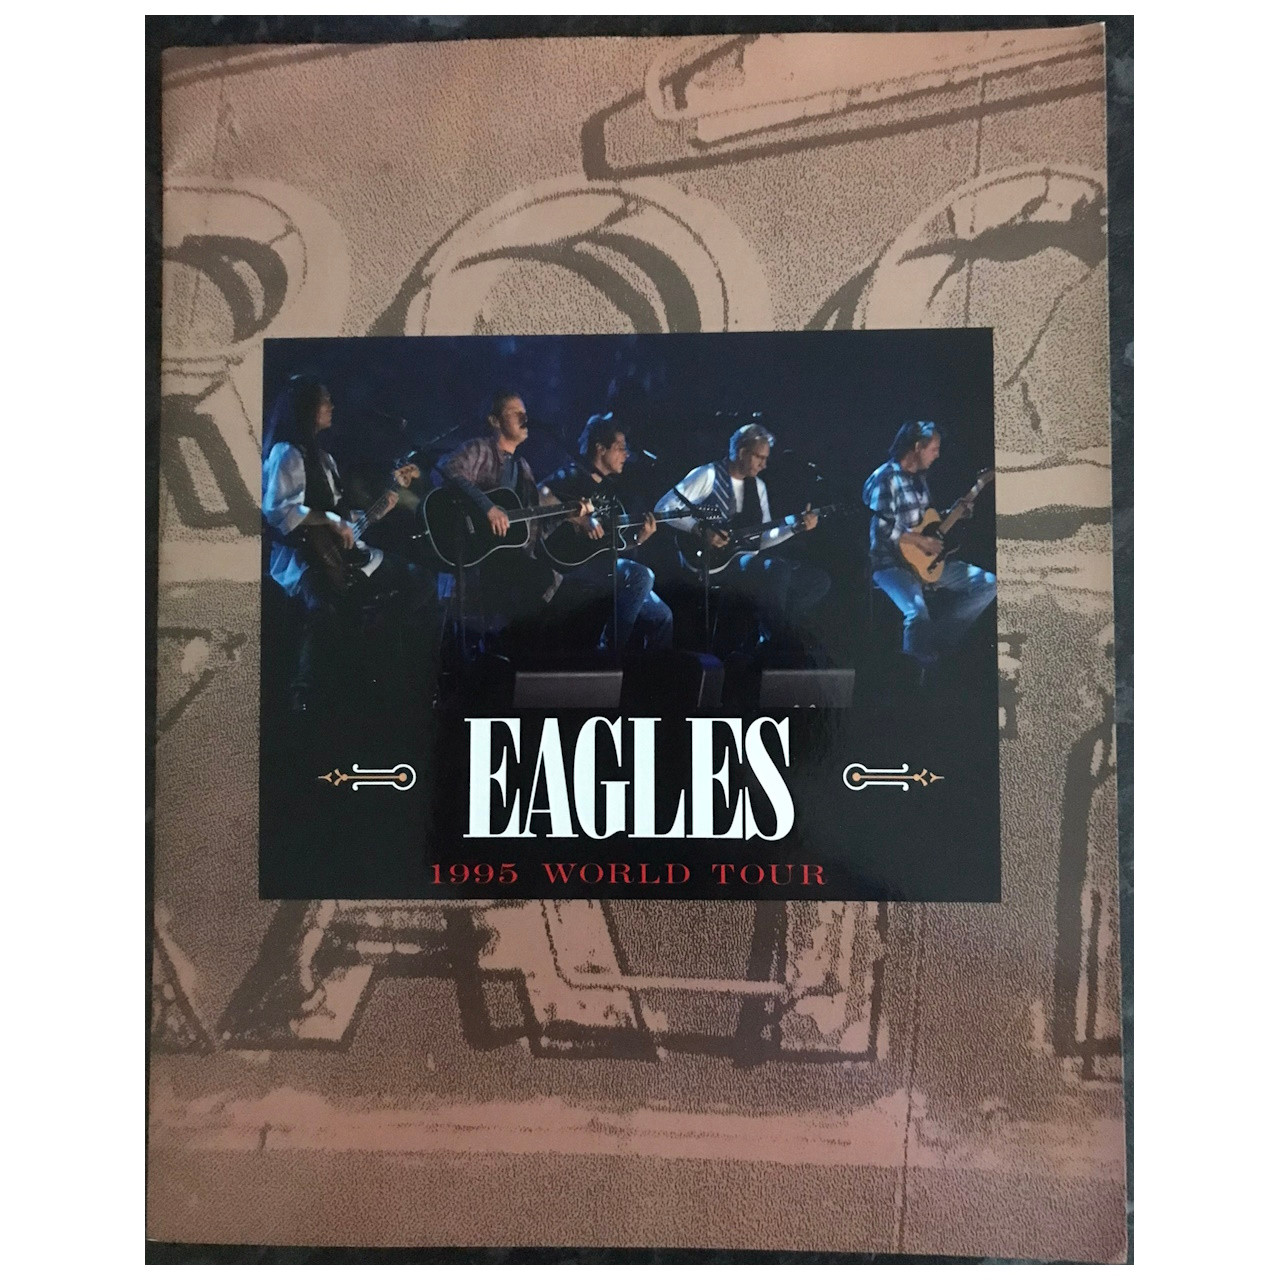 Eagles - Hell Freezes Over – Rollin' Records